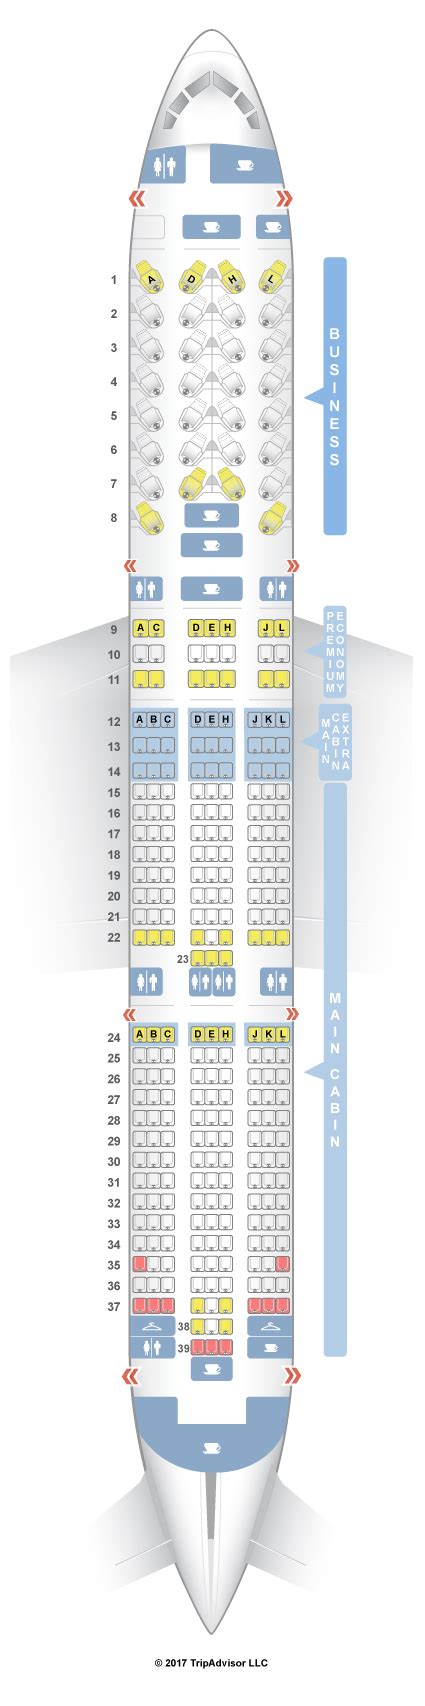 27 Boeing 787 9 Seat Map Maps Online For You